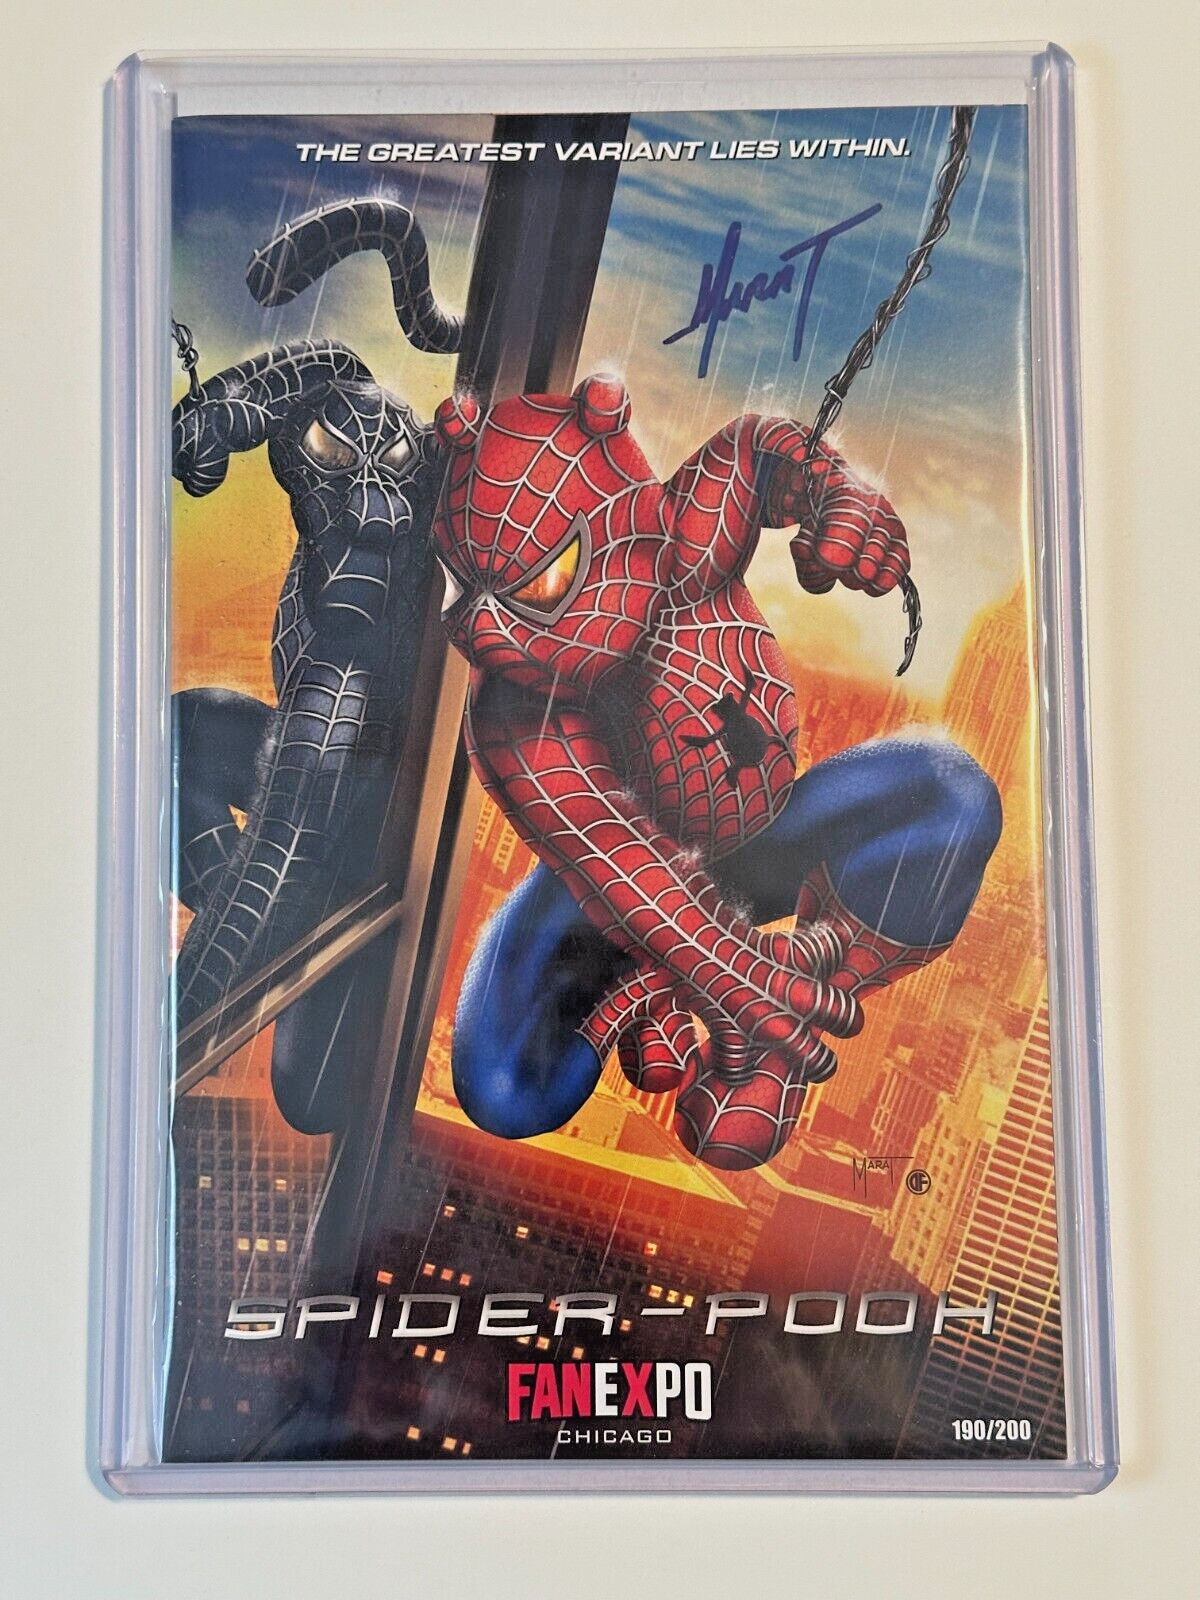 SPIDER-POOH SIGNED BY MARAT MYCHAELS CHICAGO FAN EXPO EXCLUSIVE